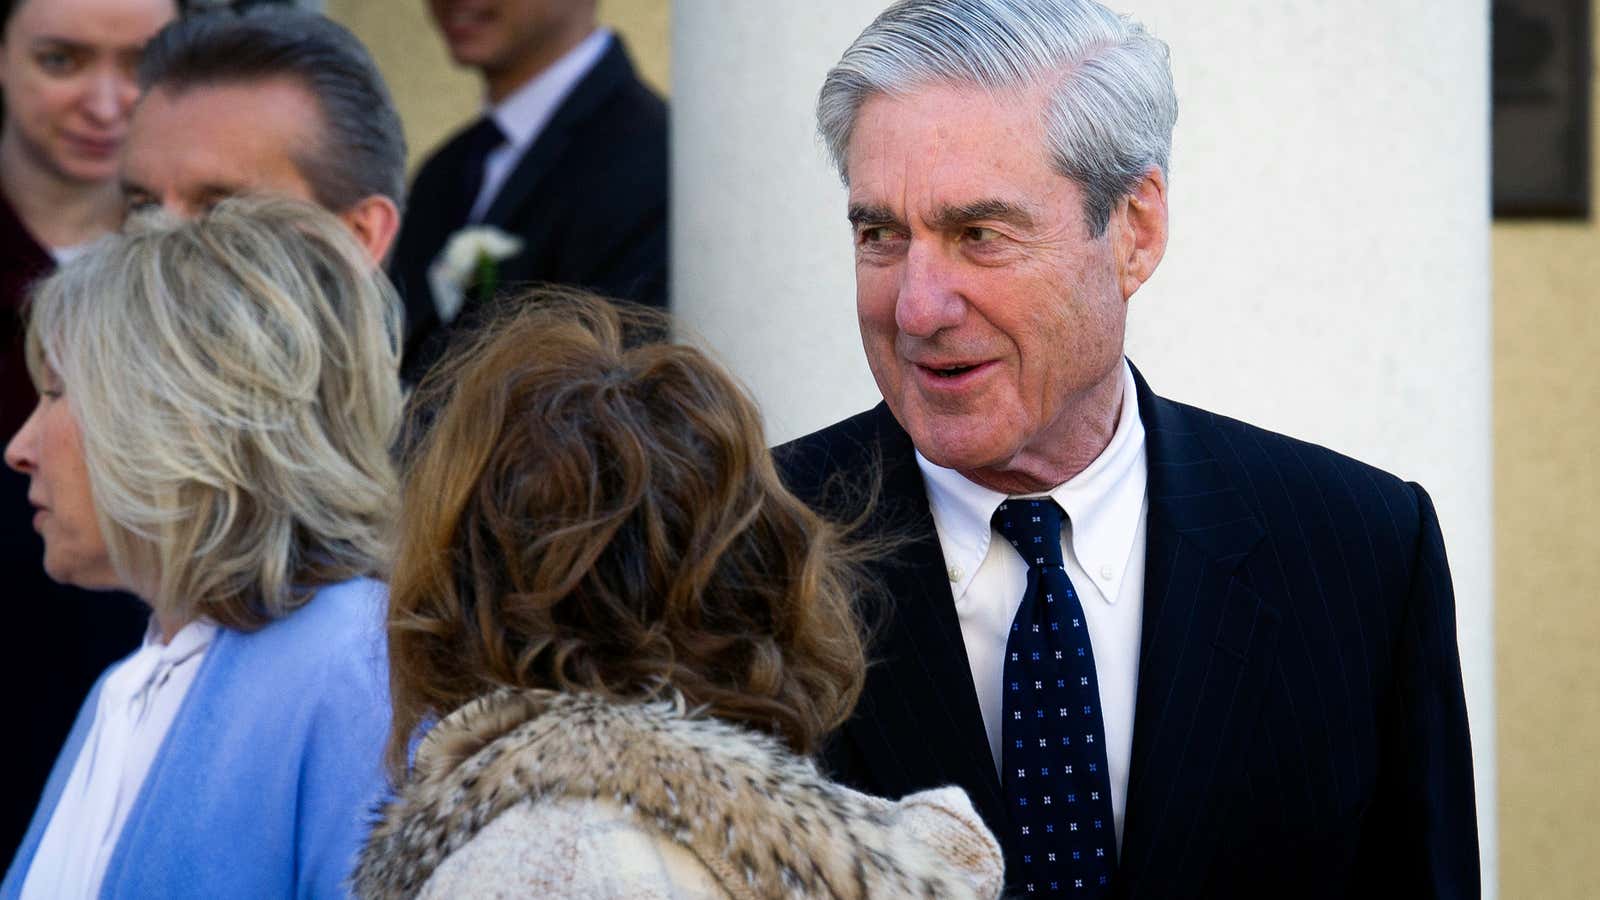 Mueller flashes a smile.